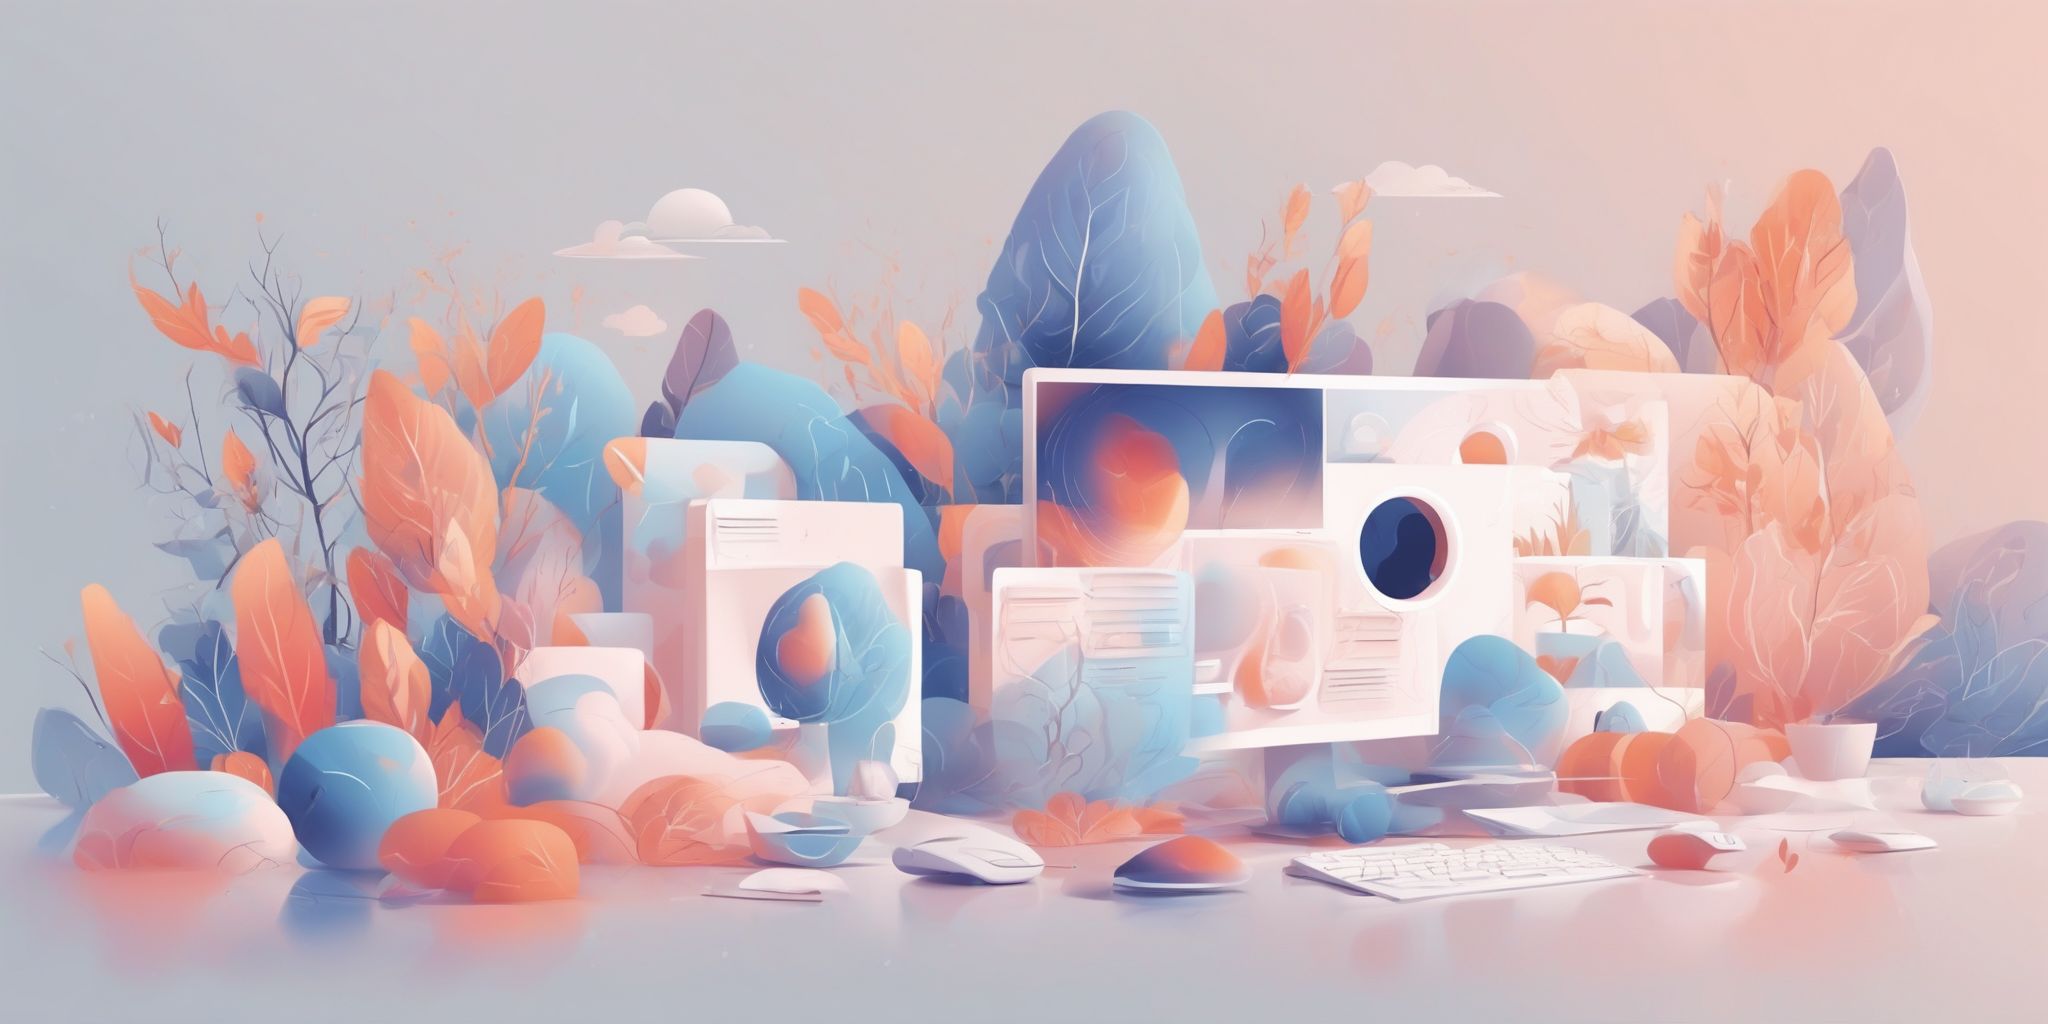 post in illustration style with gradients and white background